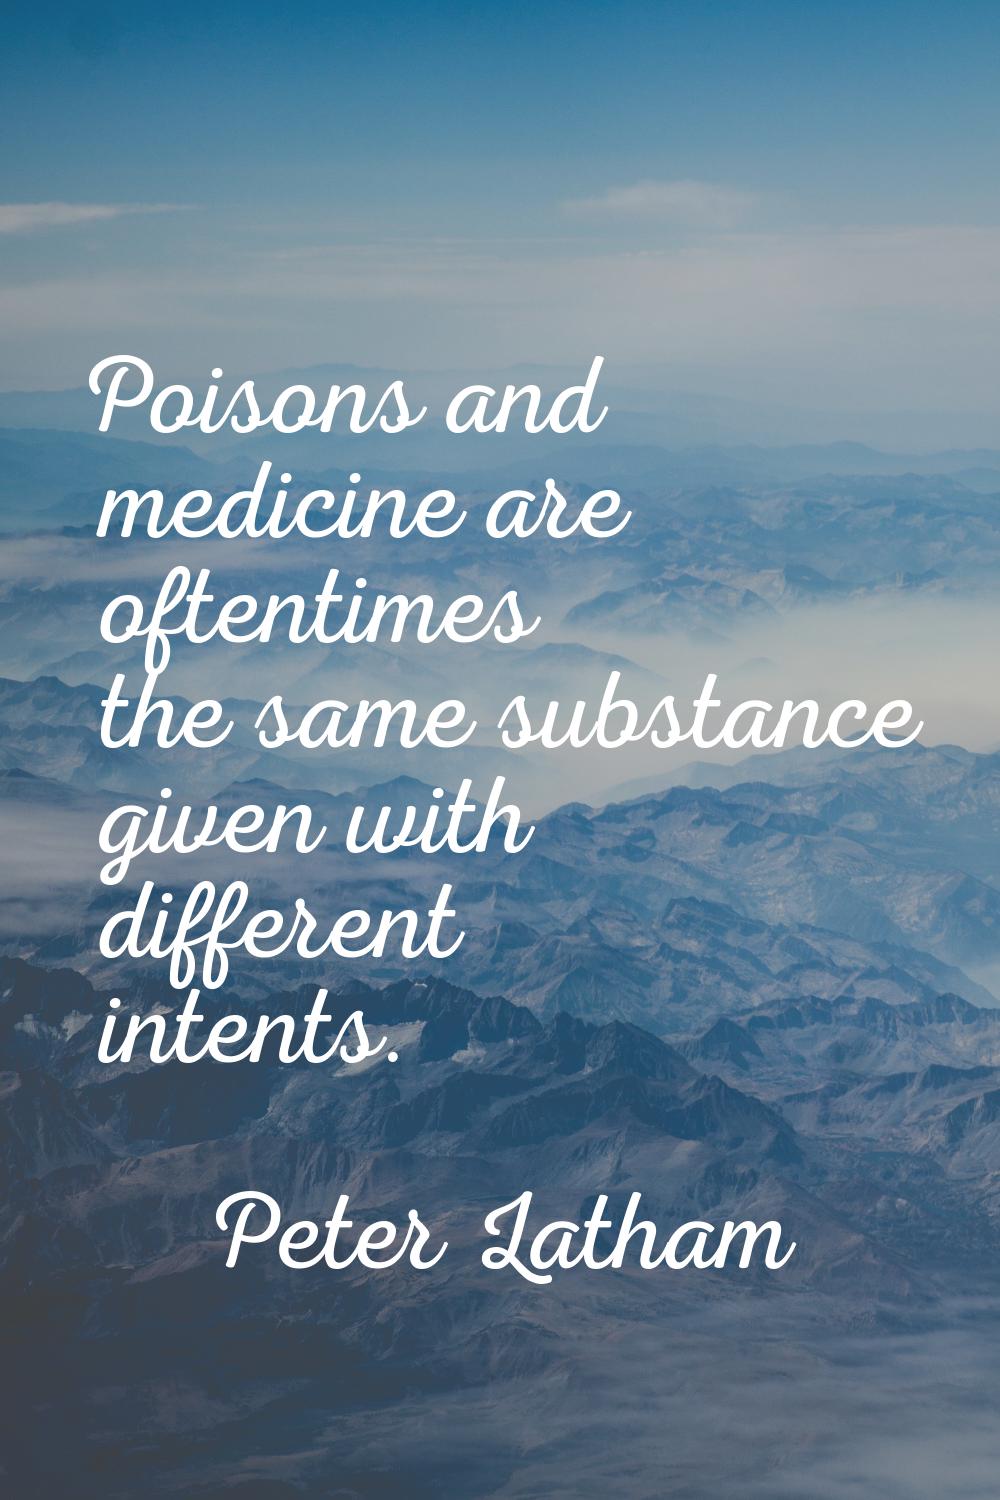 Poisons and medicine are oftentimes the same substance given with different intents.